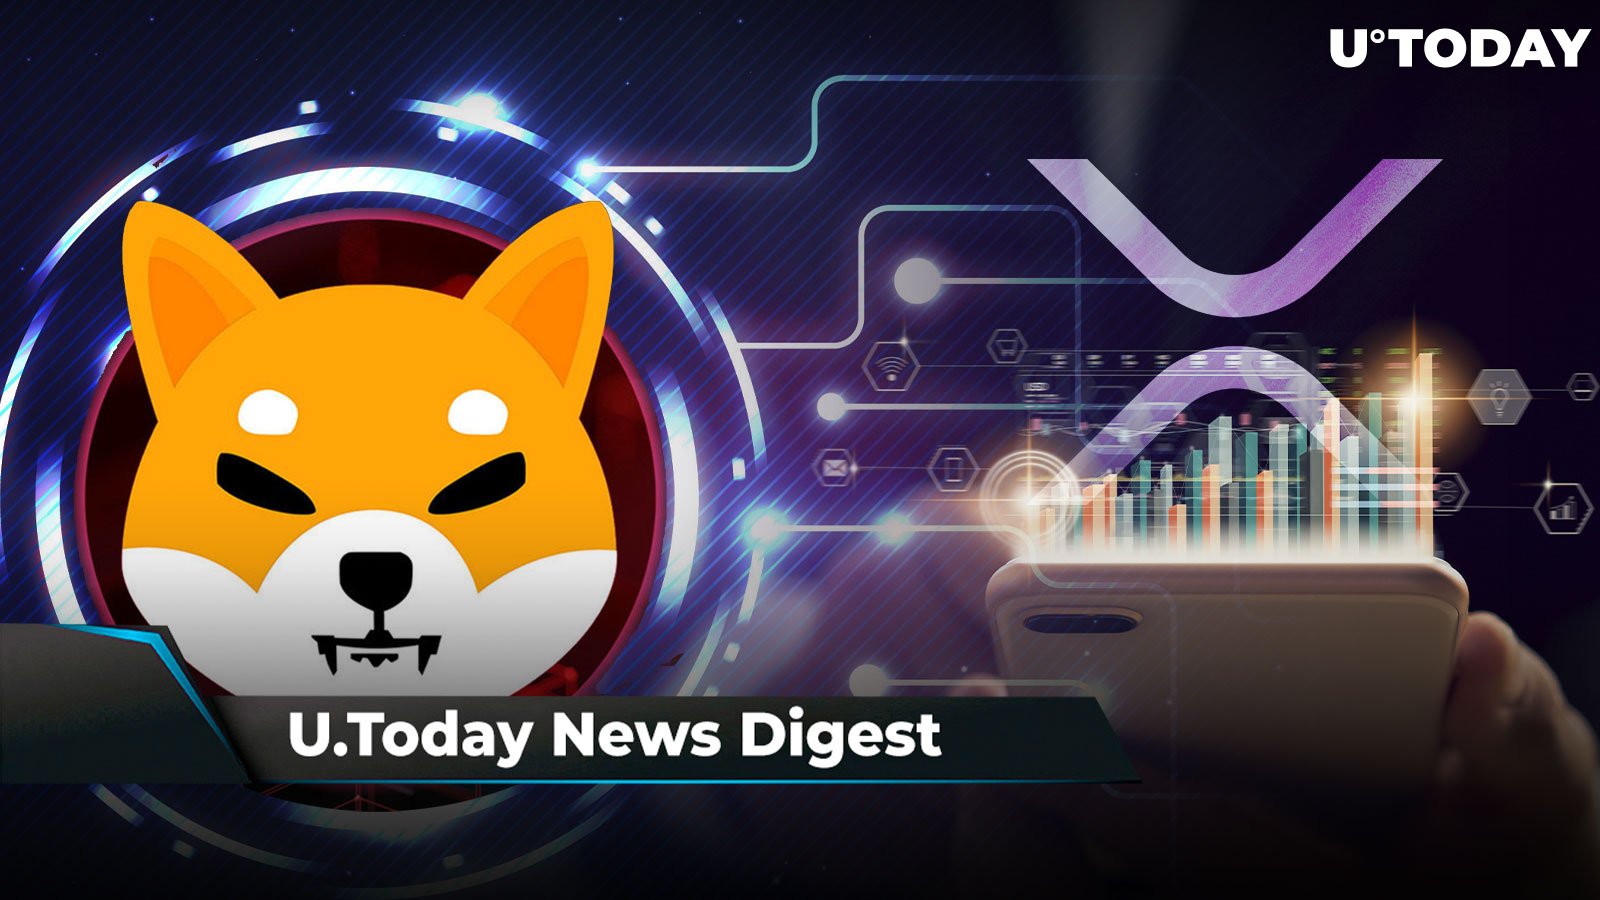 XRP Holders Win Right to Sue Ripple, Shibarium Hits New Utility Milestone, XRP Price Could See New ATH If It Prints Golden Cross: Crypto News Digest by U.Today